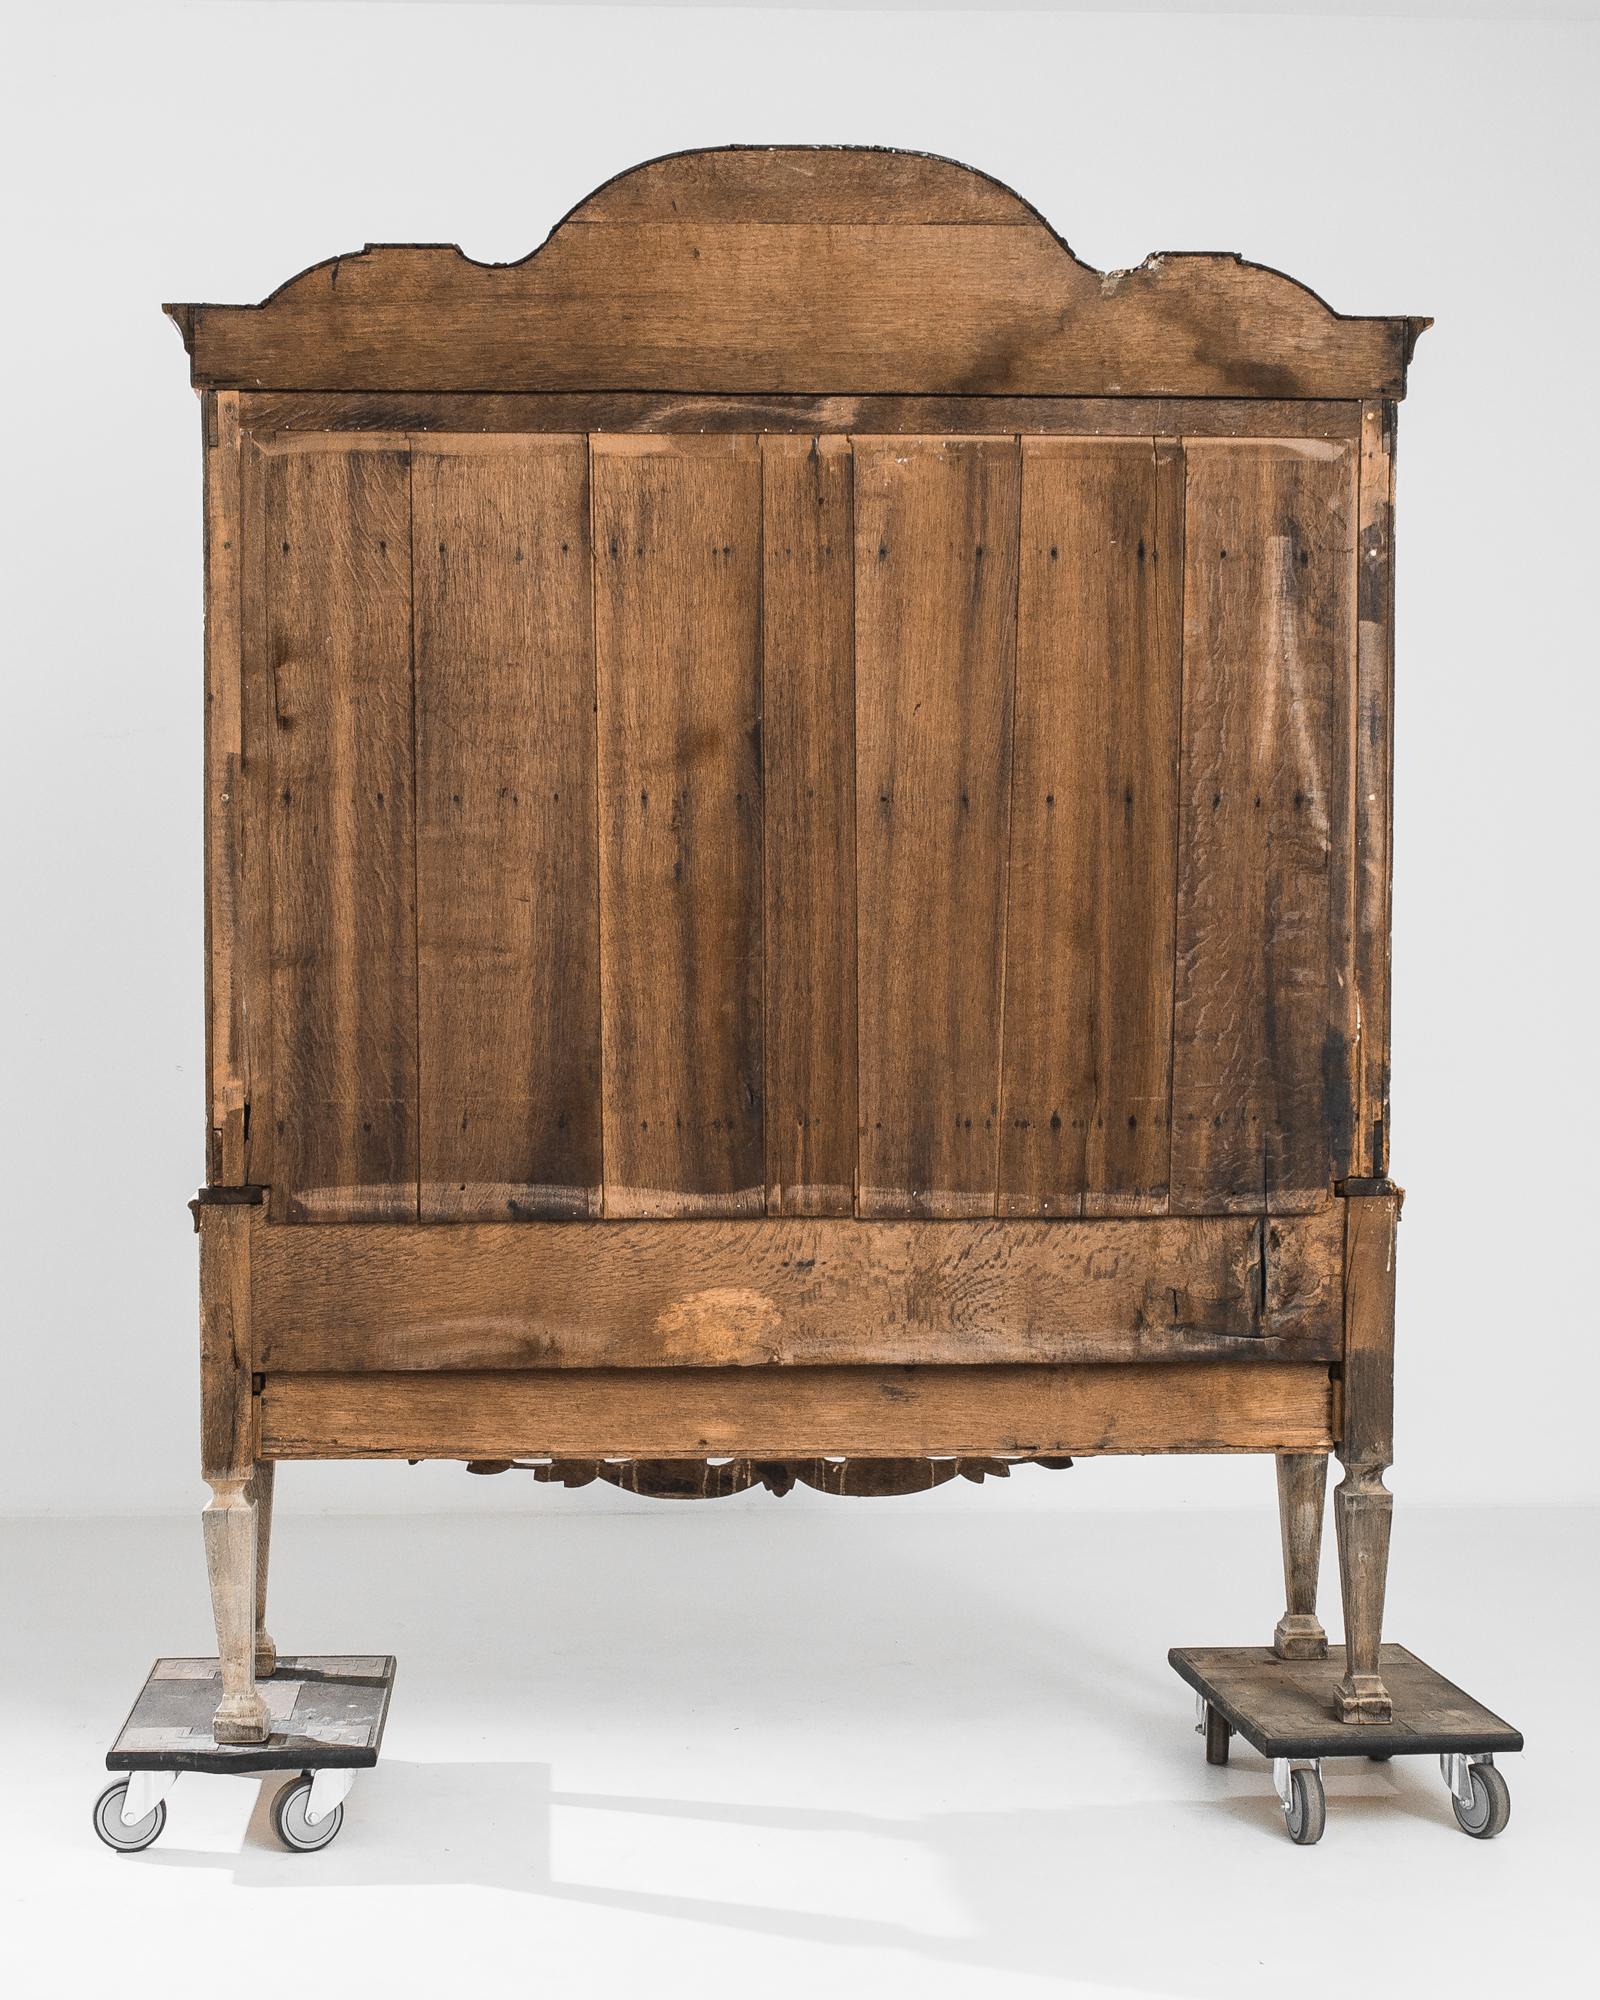 A bleached oak ‘kast’ from The Netherlands, produced circa 1780. A grand antique cabinet featuring an ornate crest over a double door cabinet holding three shelves and five interior drawers, a traditional future of Dutch buffets. Three more drawers